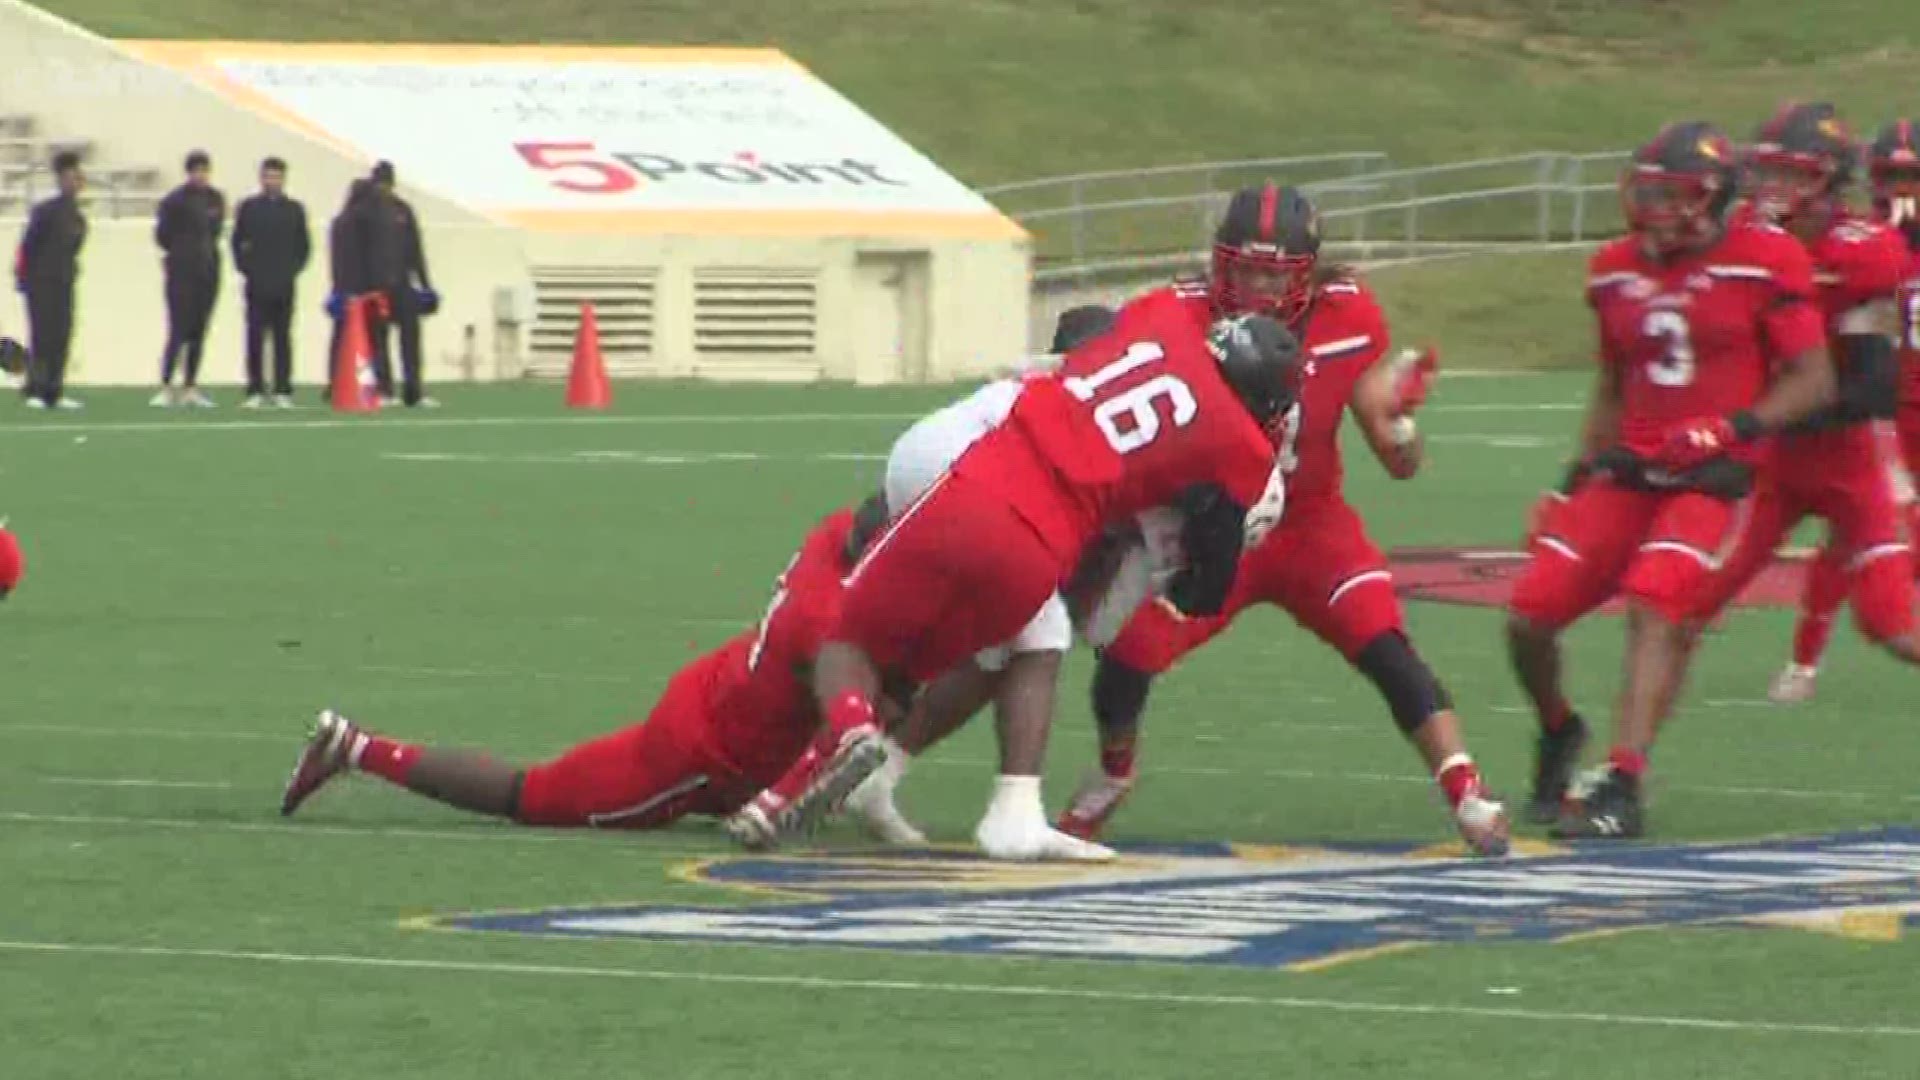 What a season for the Cardinals on the gridiron. McNeese St. is the final test of the season, a chance for LU to end it on a six game winning streak and a 7-4 overall record.